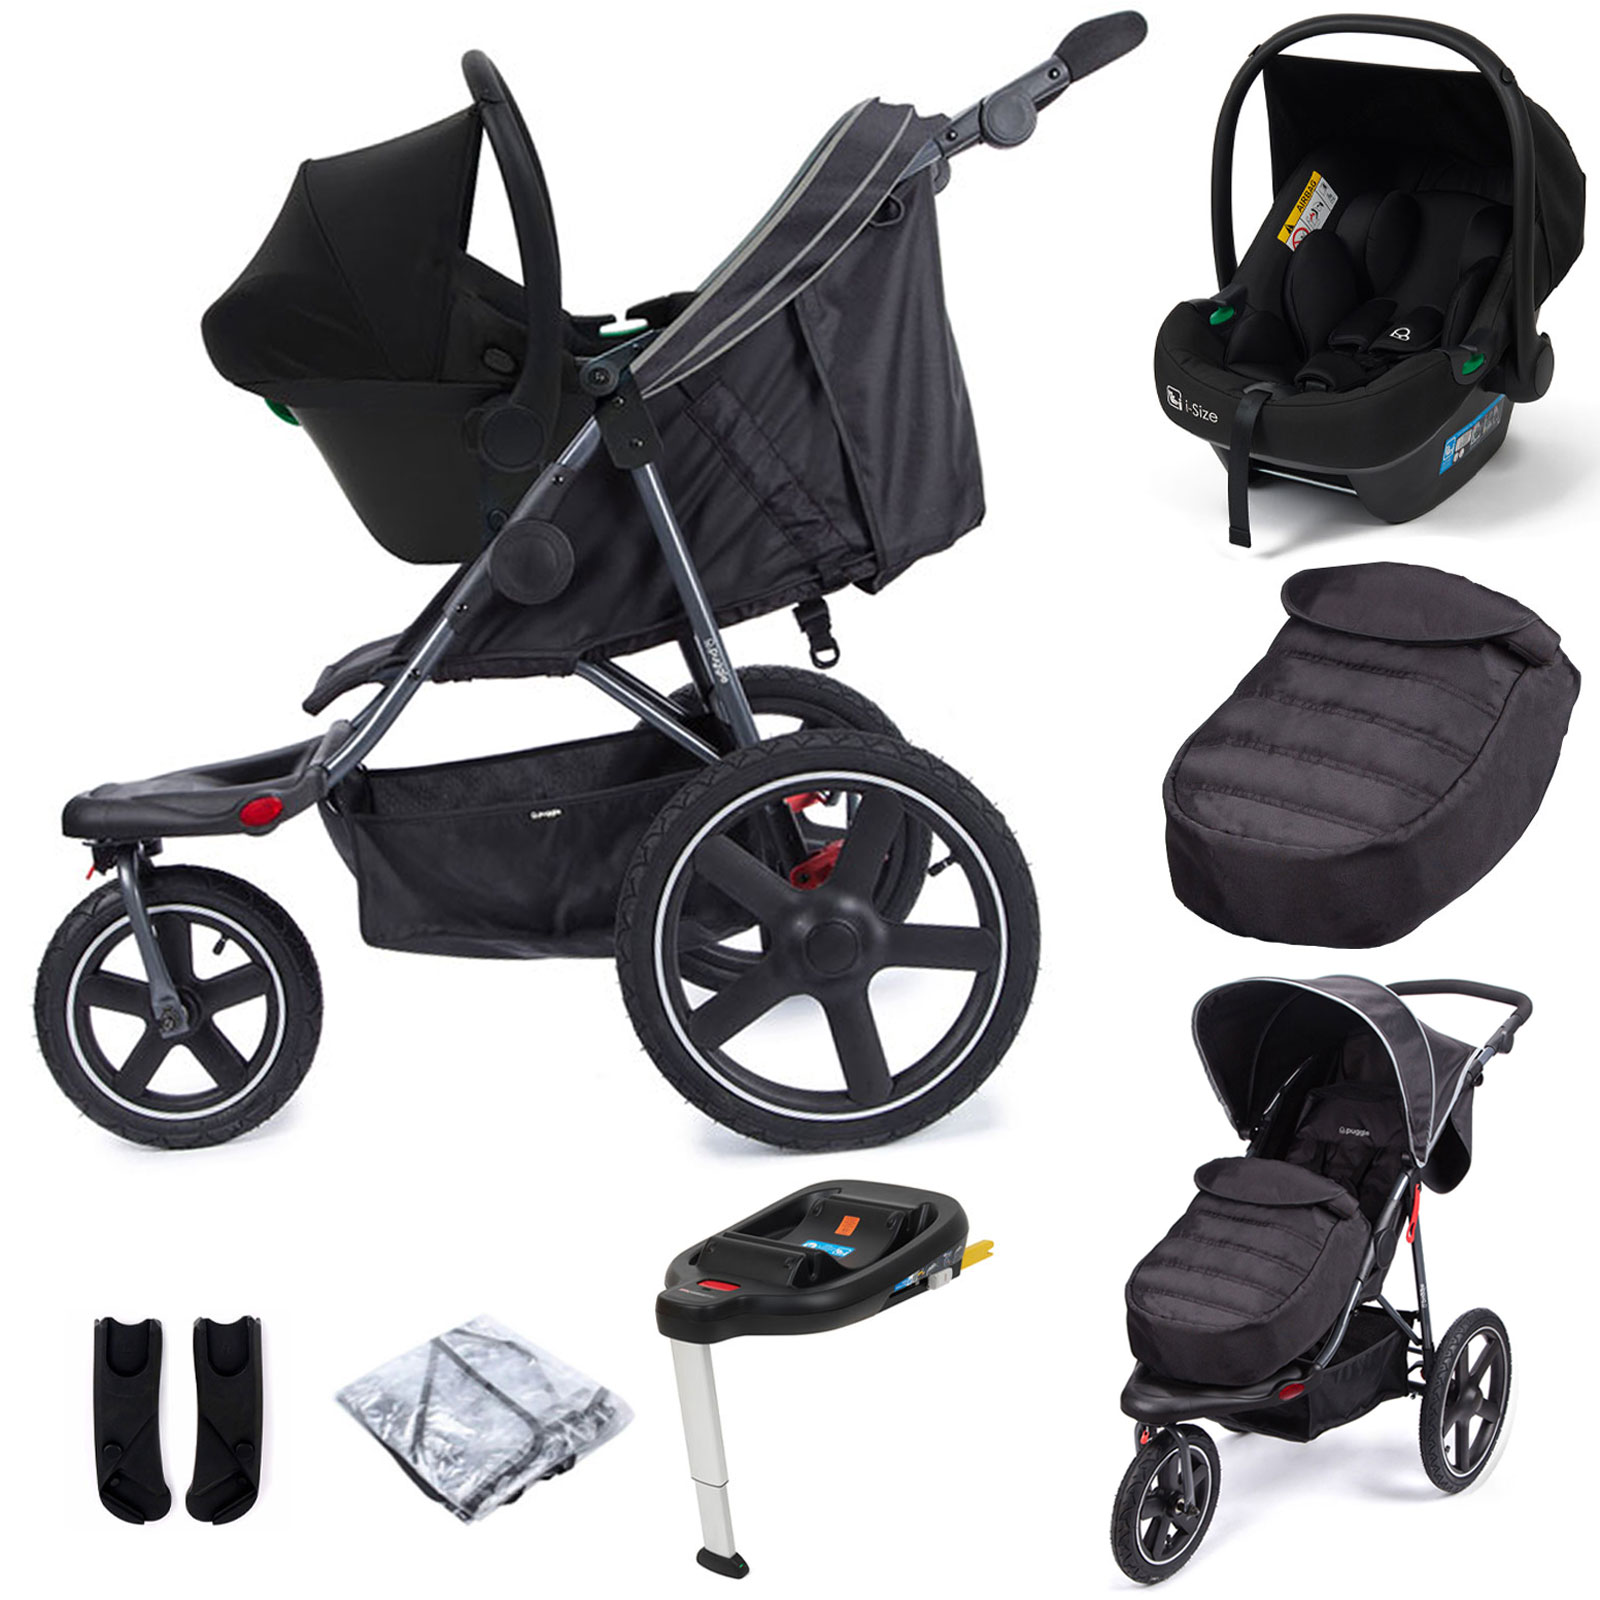 Puggle Urban Terrain Sprint GT Travel System, Adapters, Safe Fit i-Size Car Seat & ISOFIX Base - Storm Black